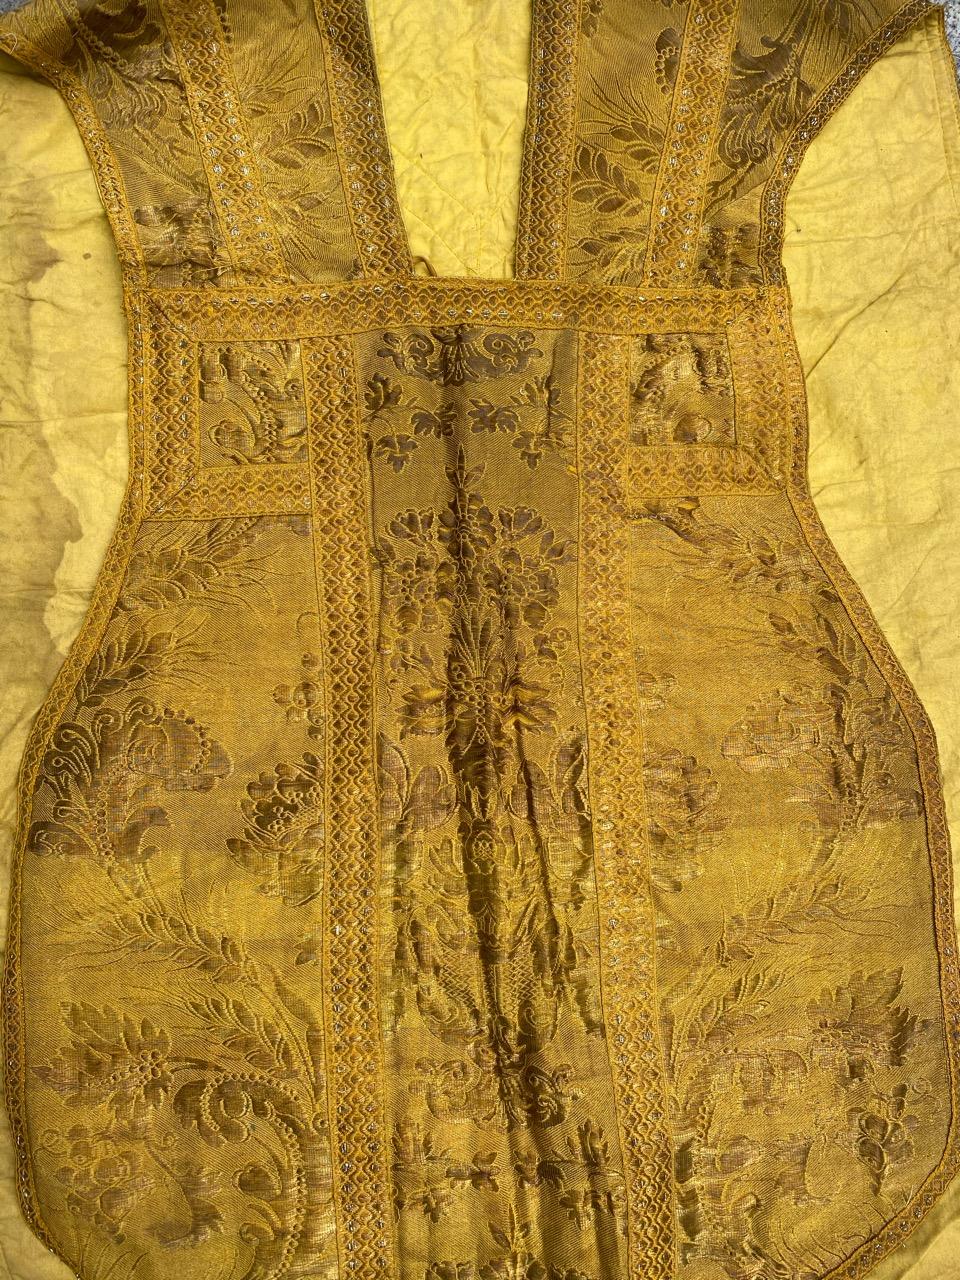 Antique French Golden Chasuble 13